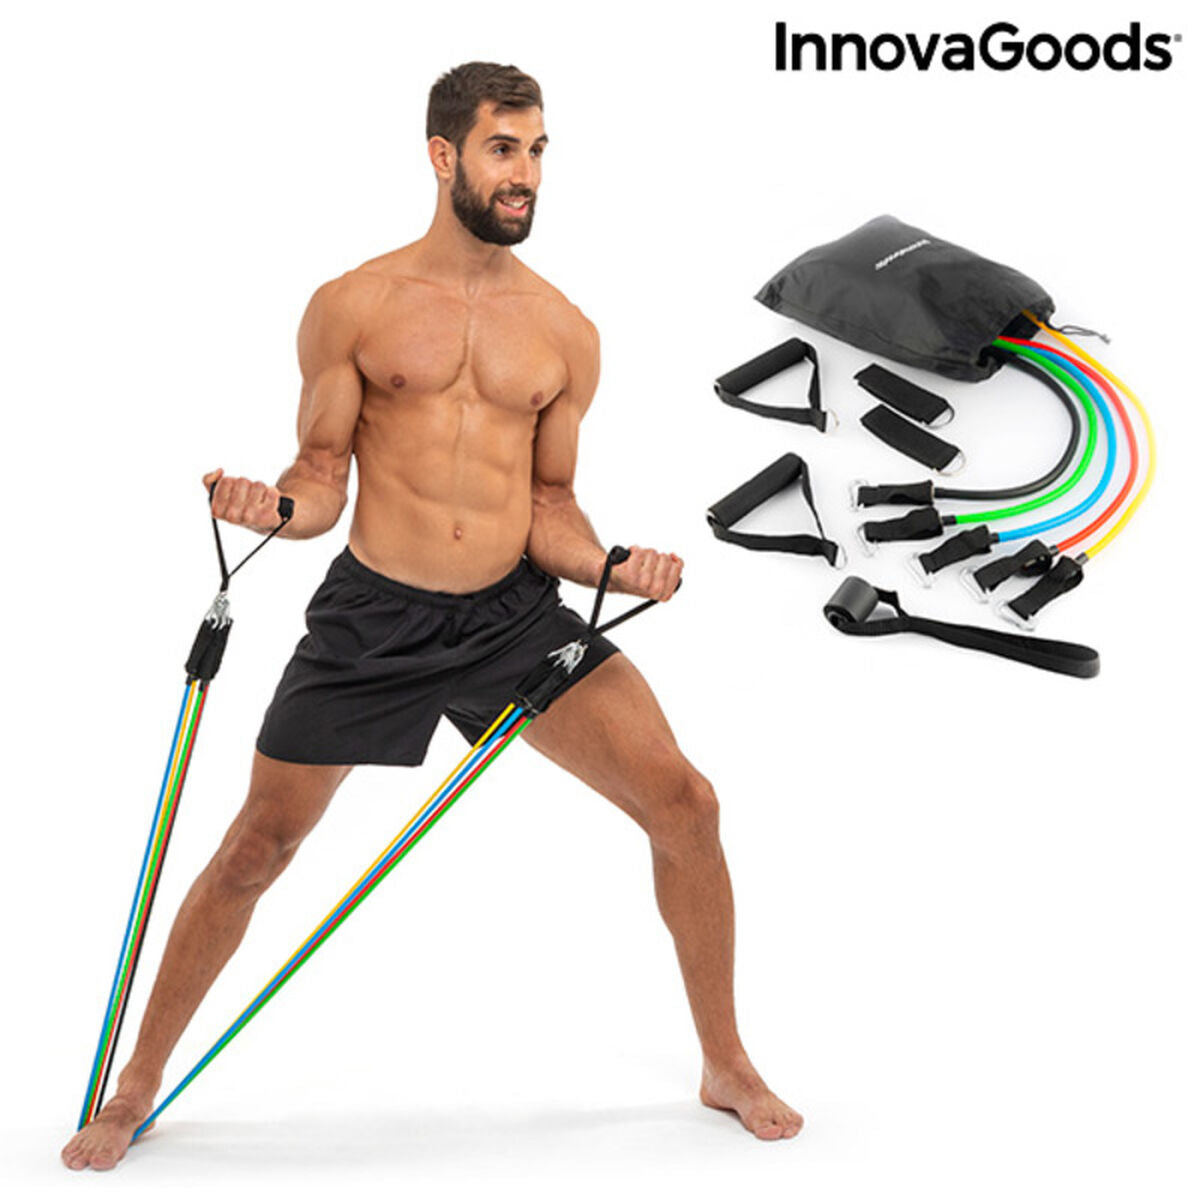 Set of Resistance Bands with Accessories and Exercise Guide Rebainer InnovaGoods (Refurbished A+)